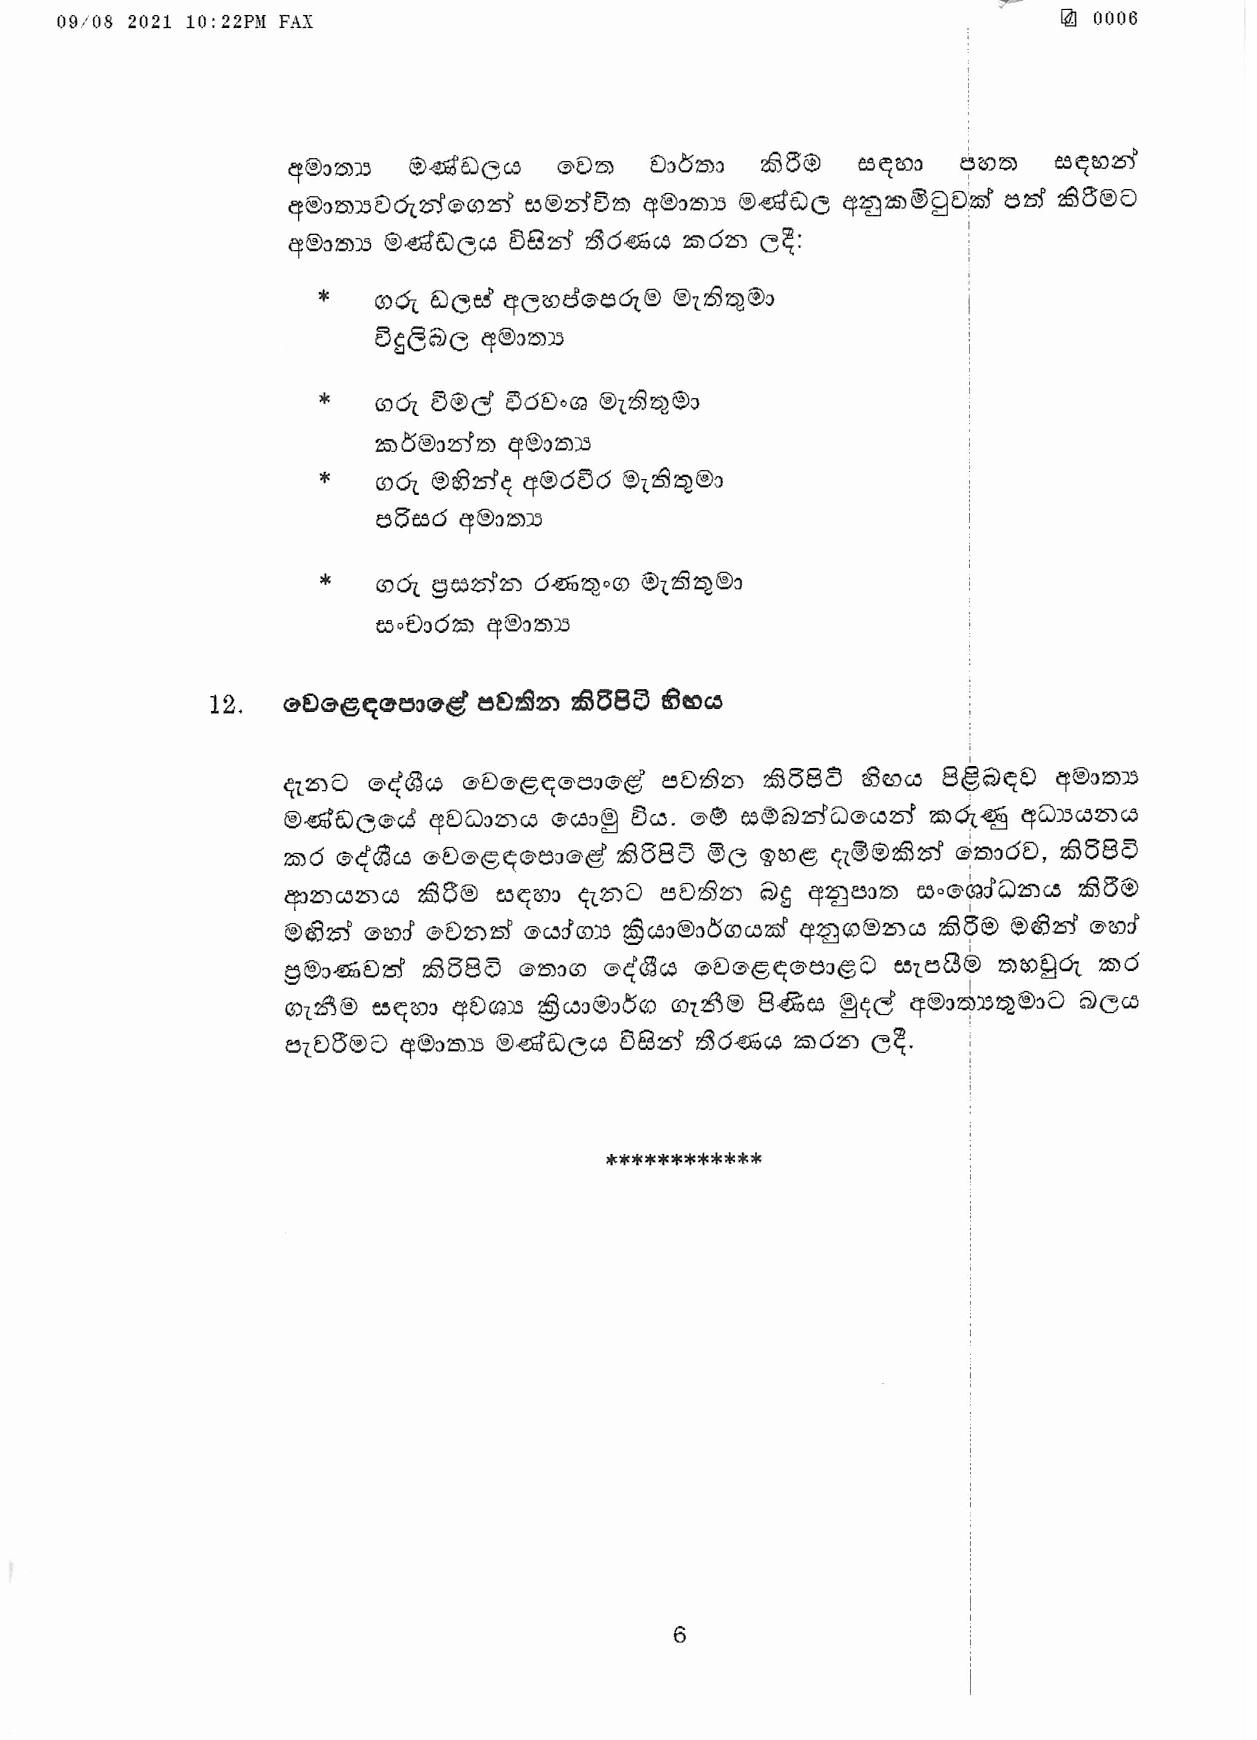 Cabinet Decision on 09.08.2021 page 006